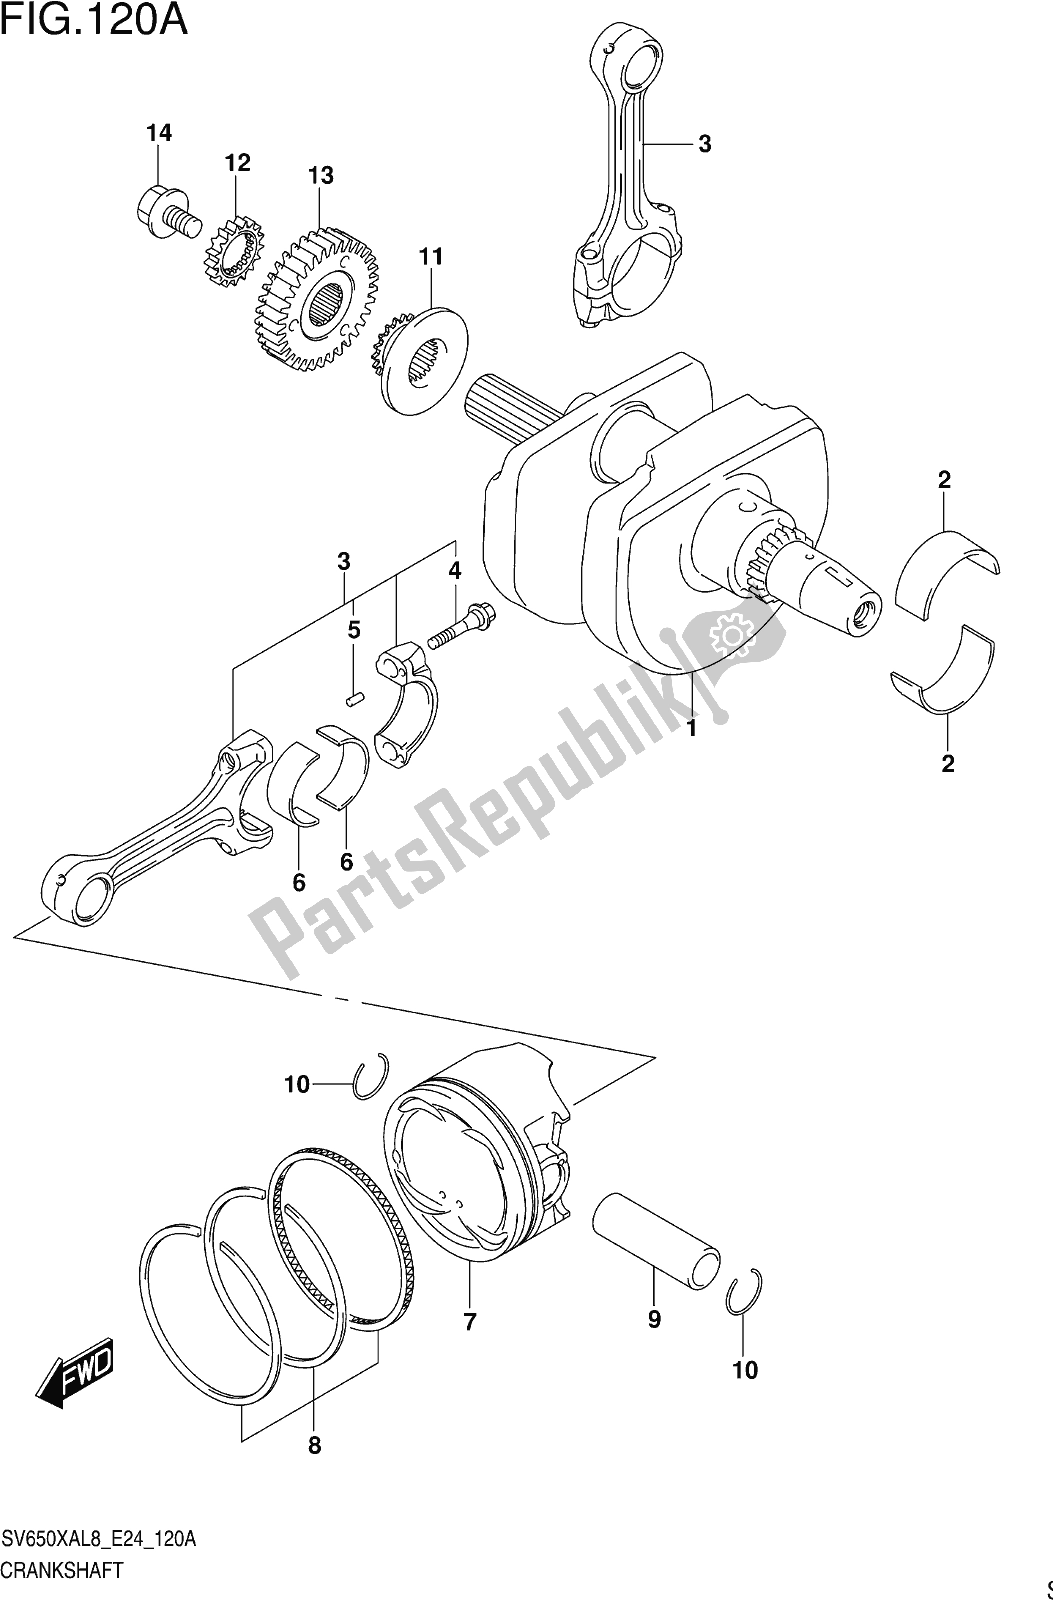 All parts for the Fig. 120a Crankshaft of the Suzuki SV 650 XA 2018